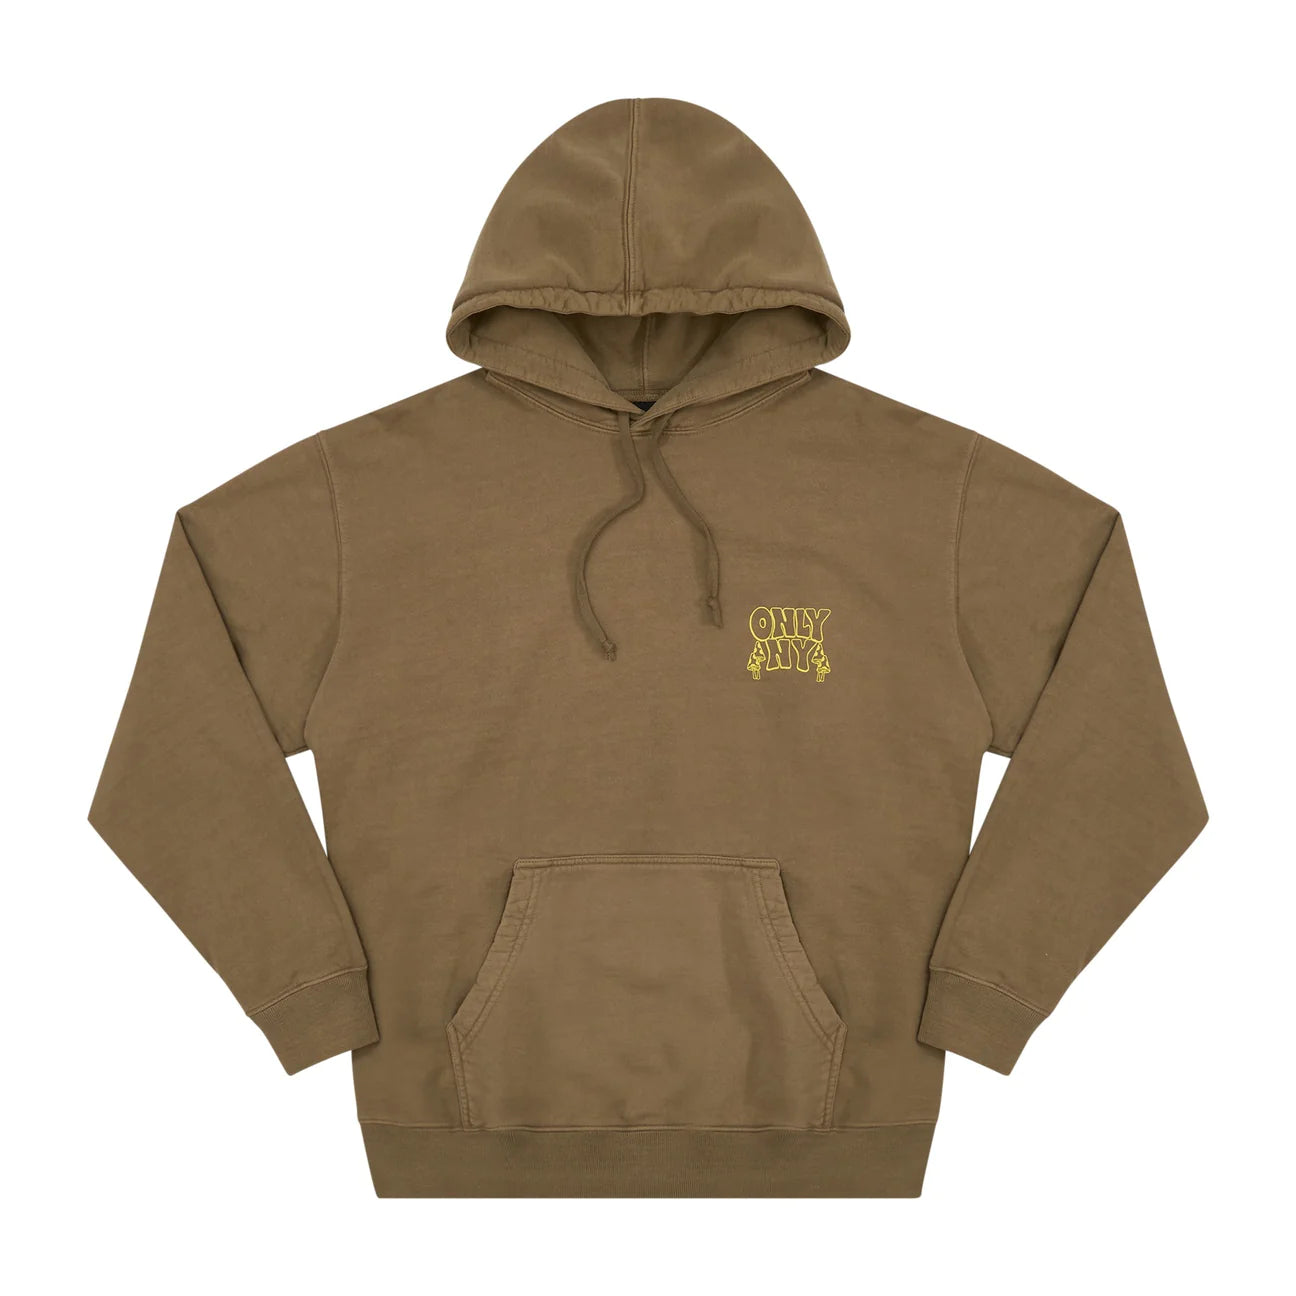 Only NY Time Traveler Hoodie